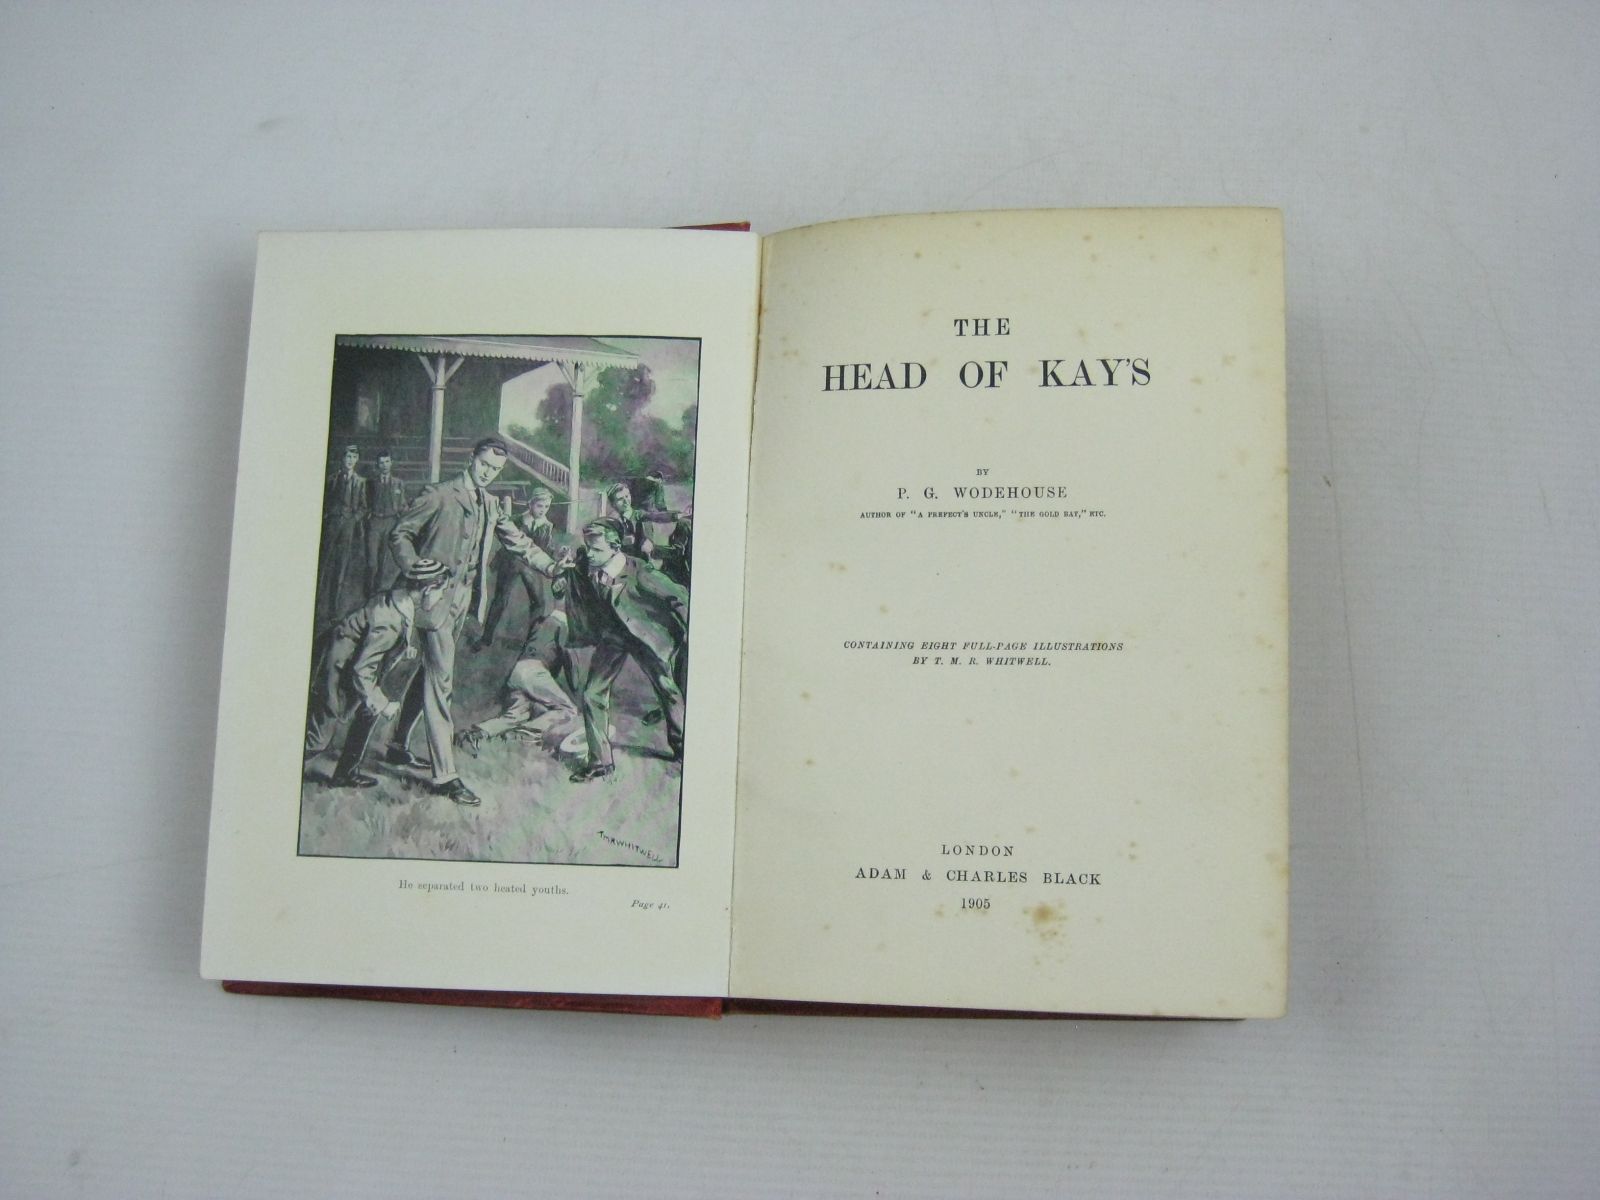 Photo of THE HEAD OF KAY'S written by Wodehouse, P.G. illustrated by Whitwell, T.M.R. published by Adam & Charles Black (STOCK CODE: 1504928)  for sale by Stella & Rose's Books